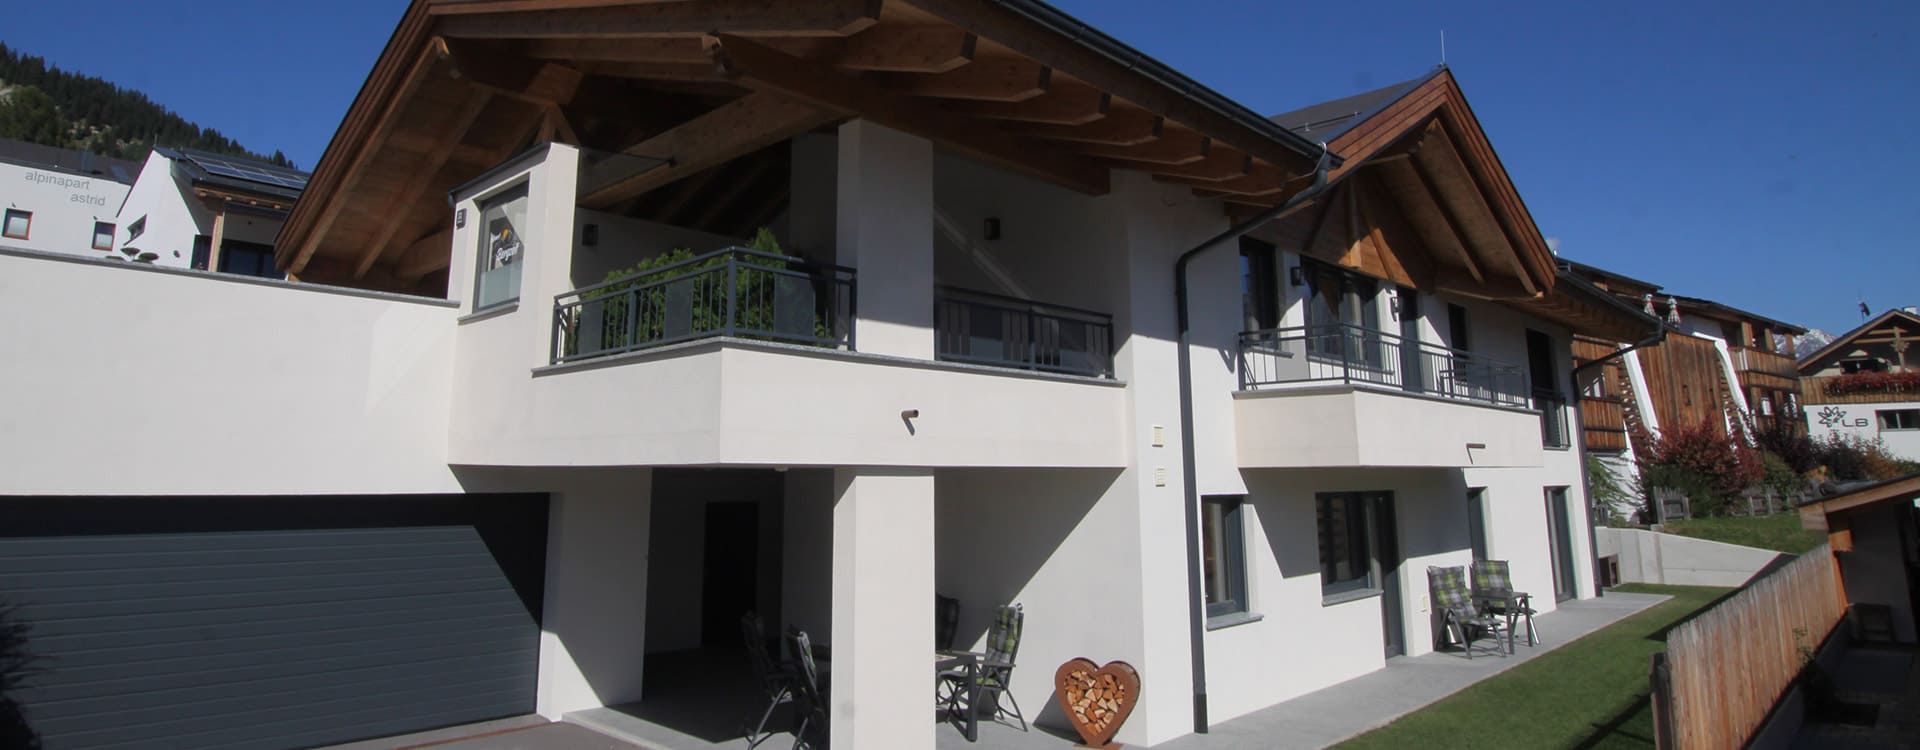 House Apart Bergzeit with apartments in Fiss, Tyrol